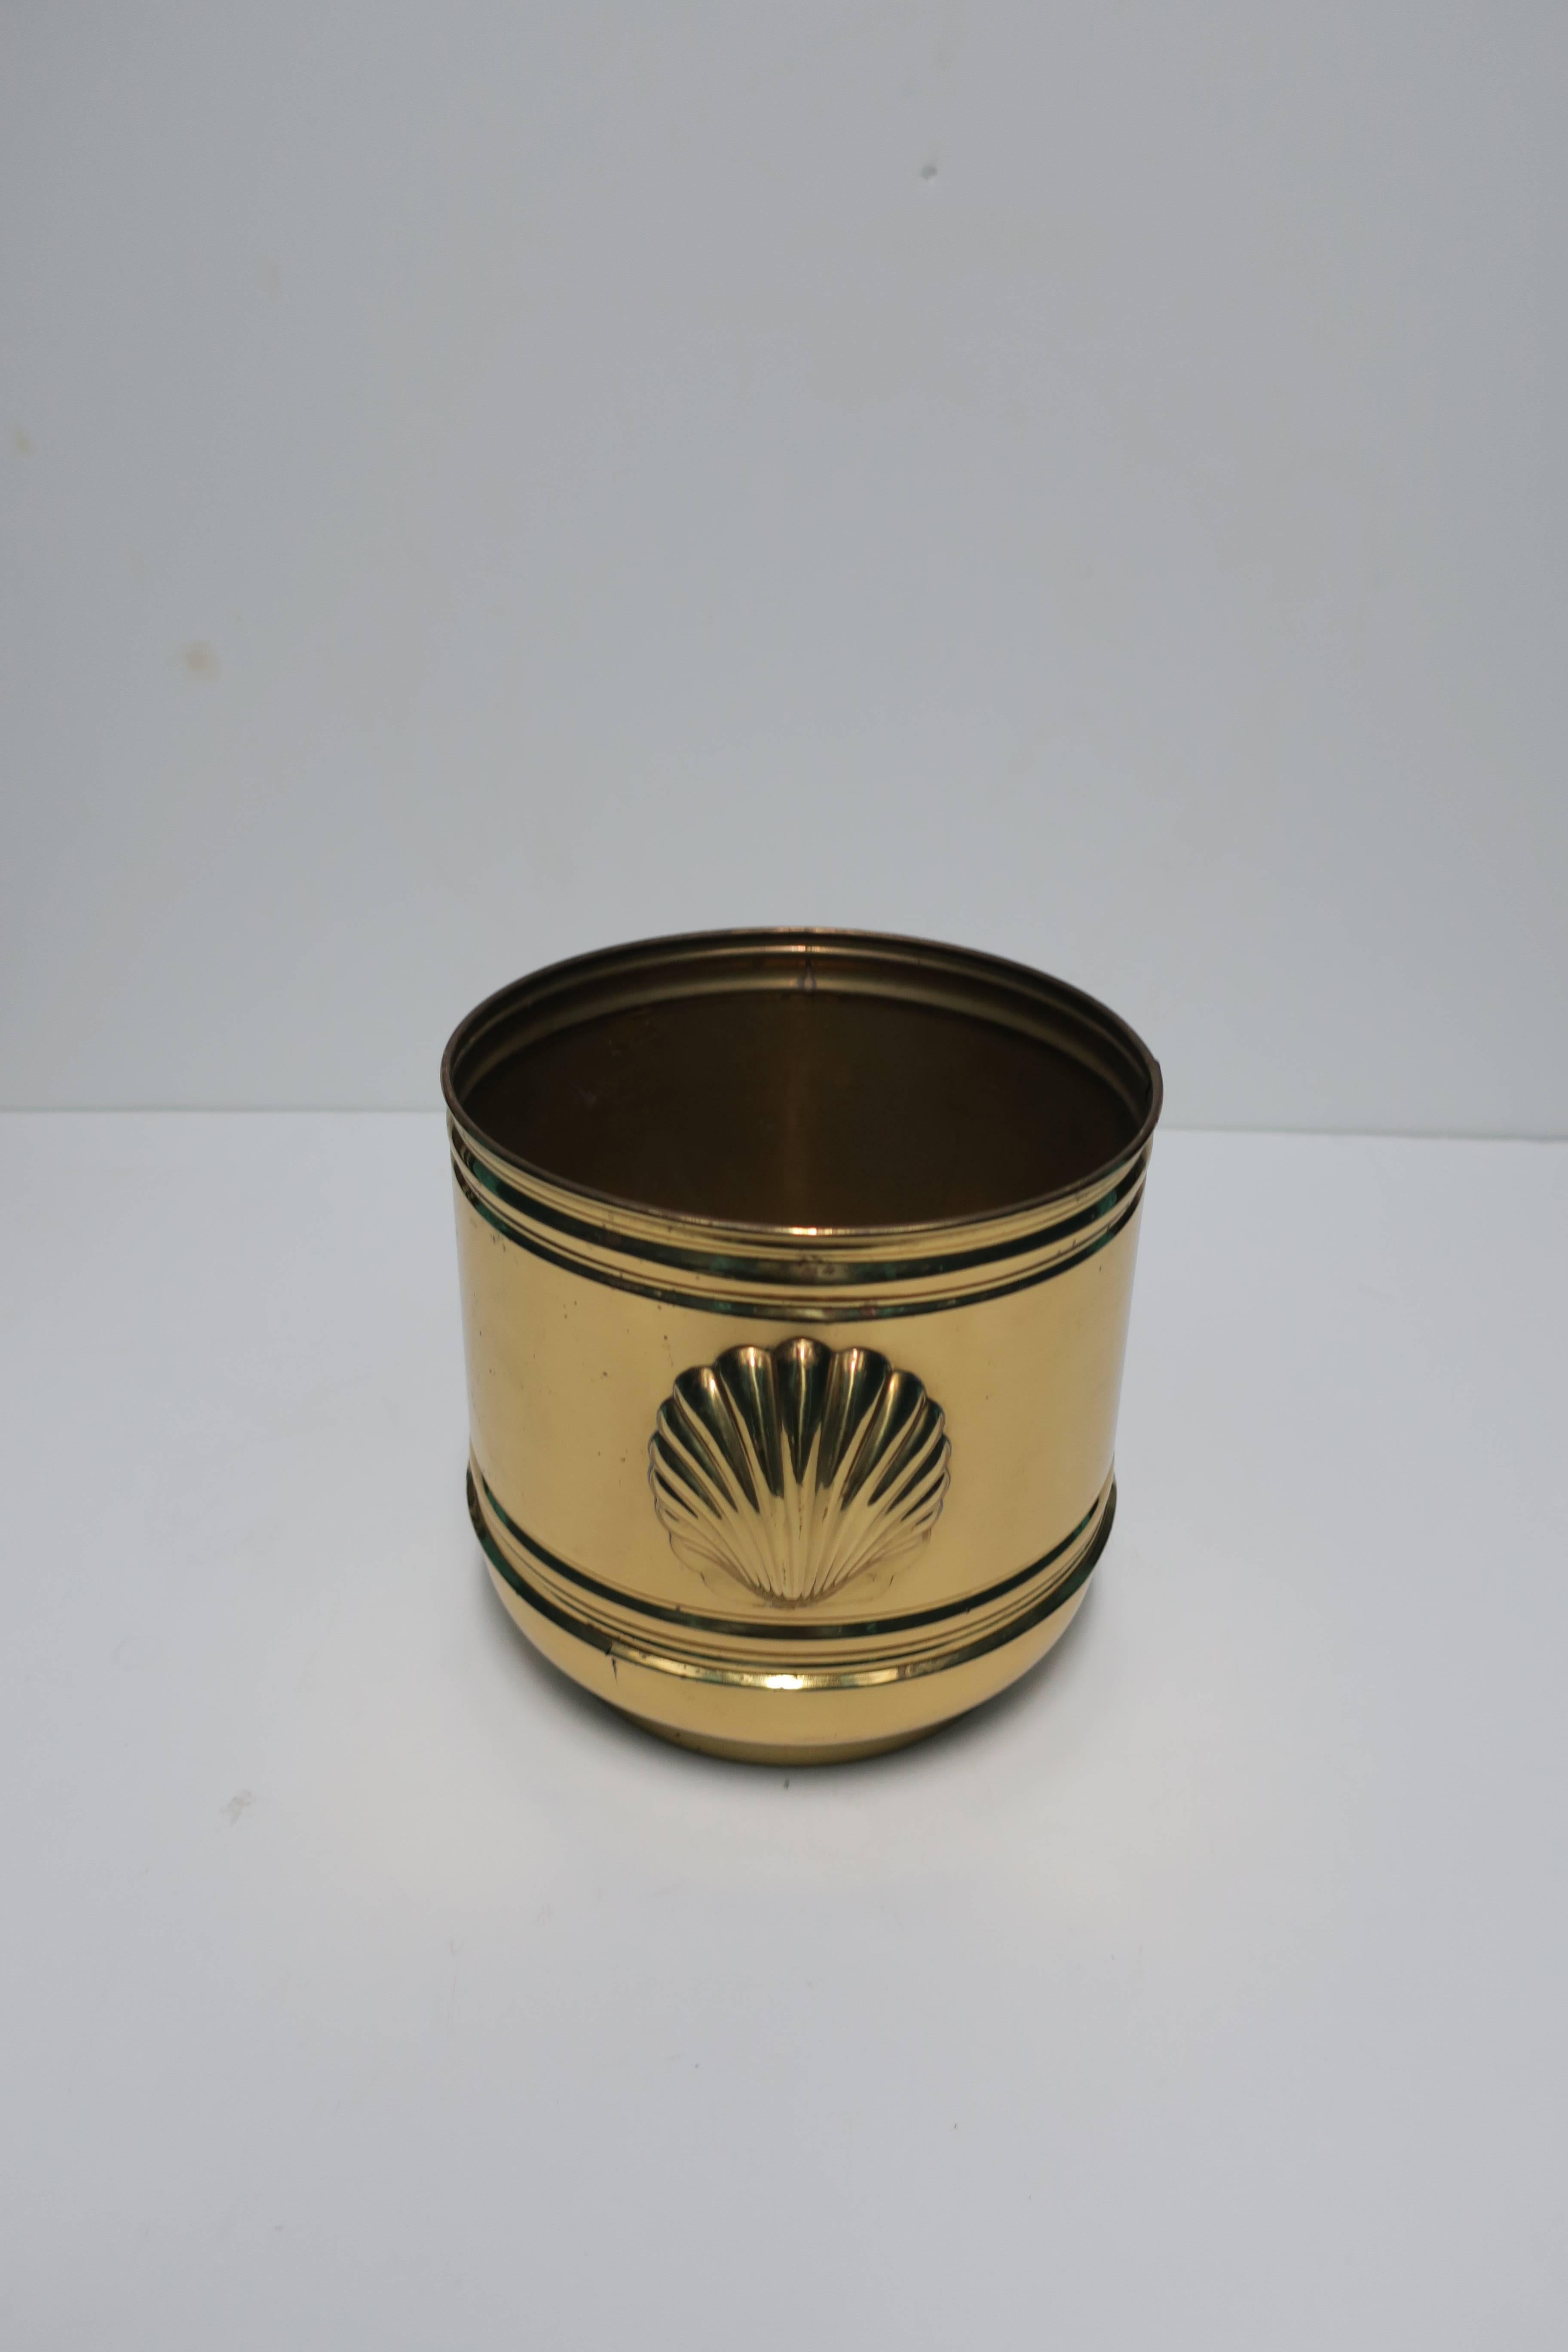 Vintage English brass decorative cachepot (flower or plant pot holder) with scallop shell detailing on two sides. Marked 